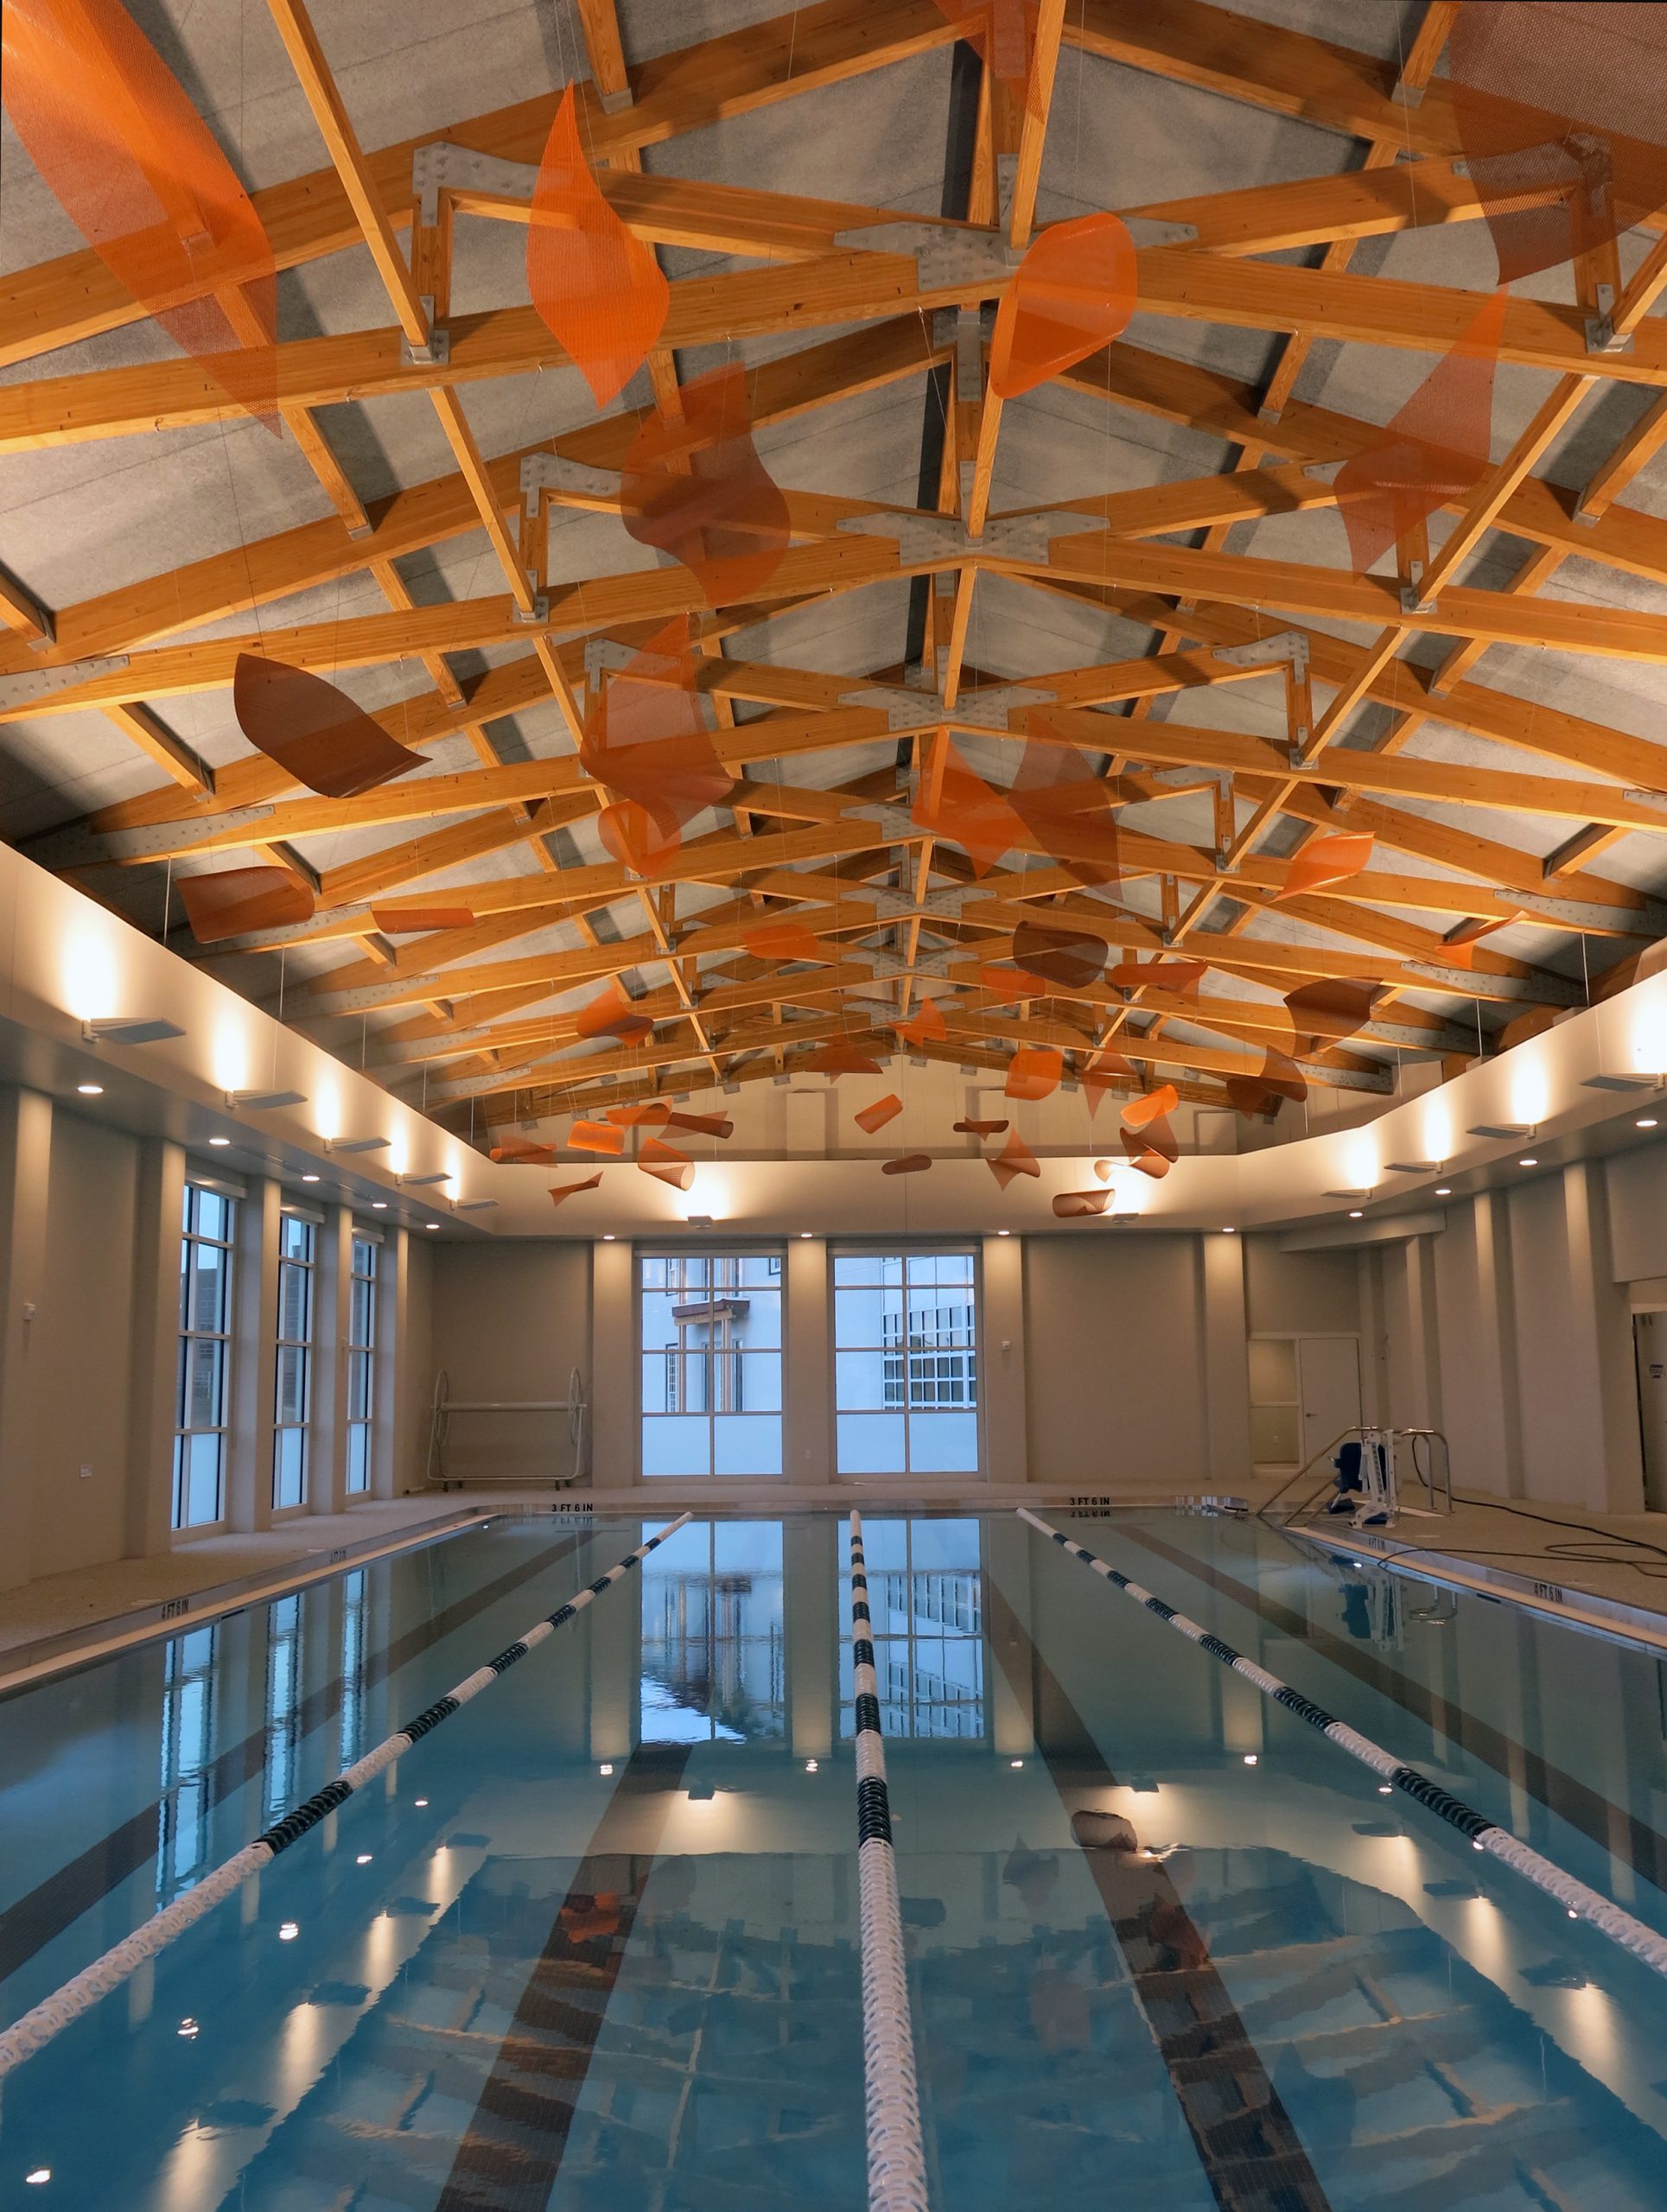 Suspended healthcare art sculpture by Talley Fisher in the indoor pool of Aurora Health and Wellness Center.